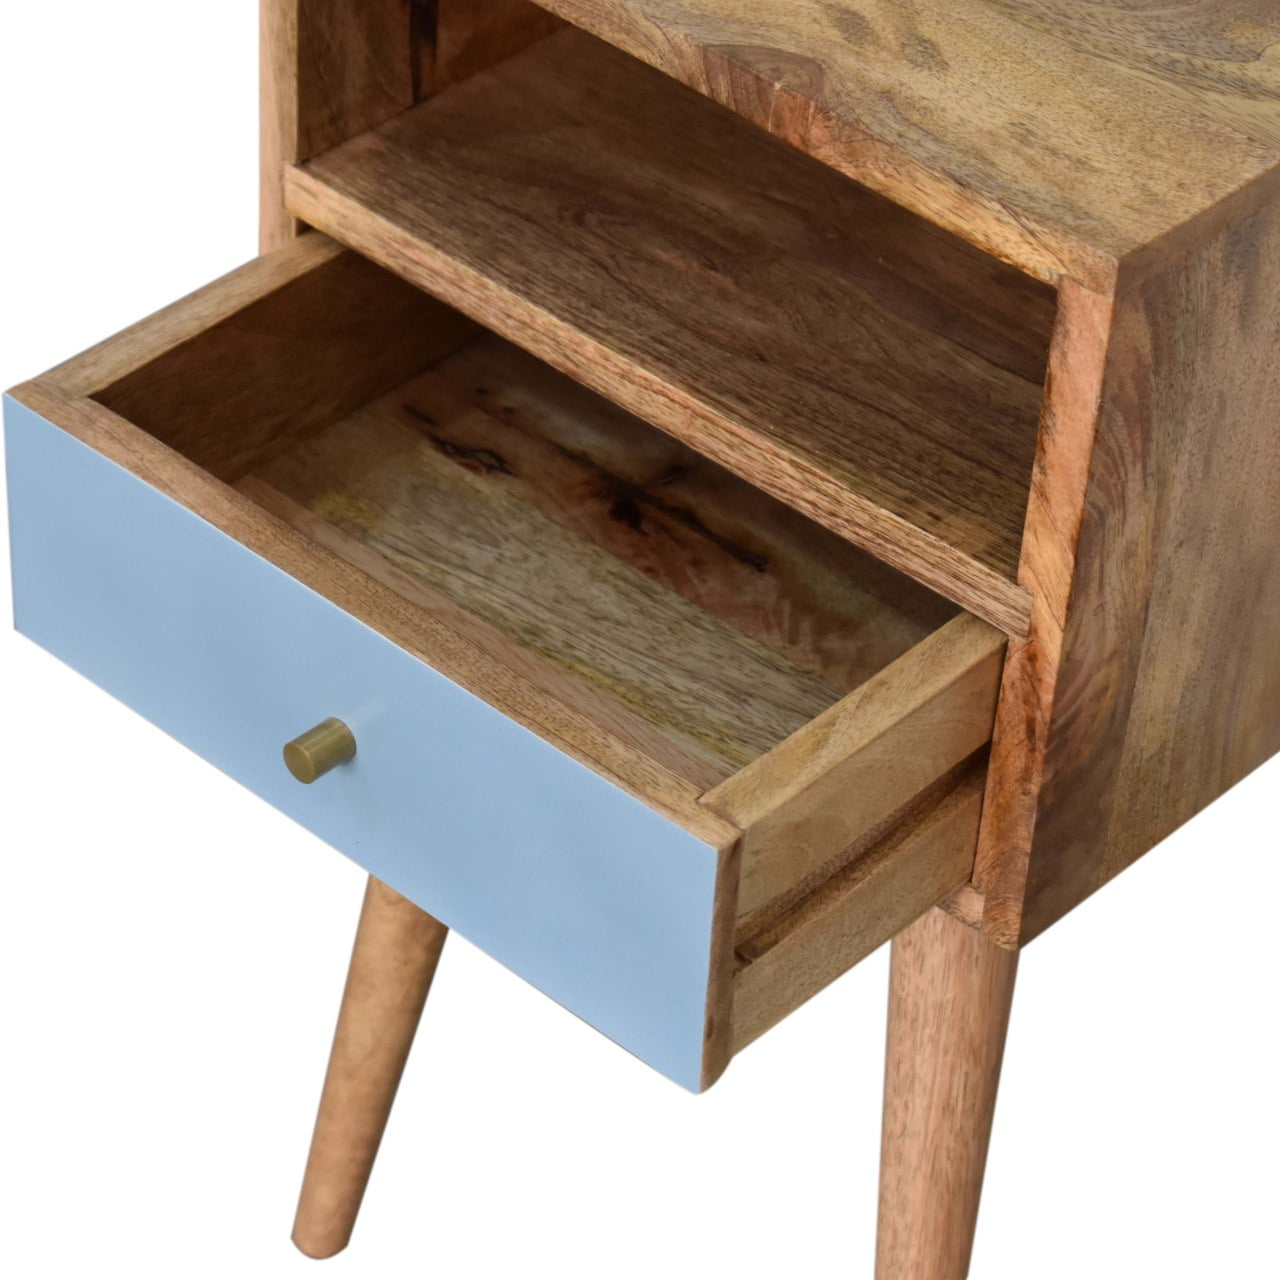 Elly Blue Hand Painted Small Bedside Table | malletandplane.com